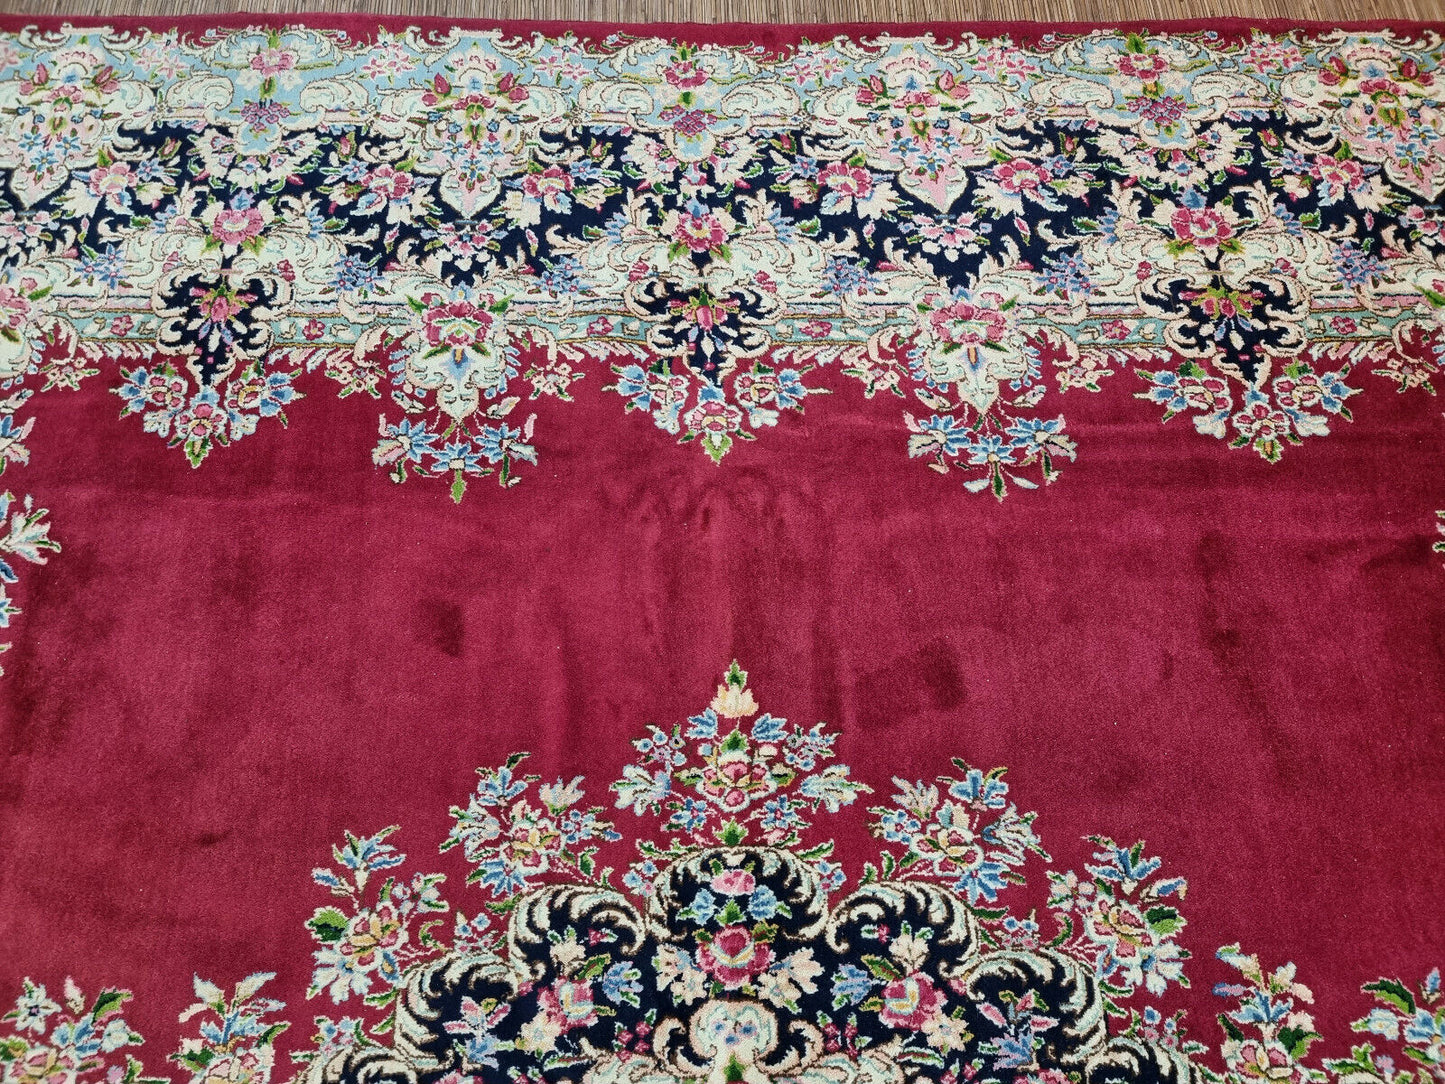 Close-up of floral and vine designs on Handmade Vintage Persian Kerman Rug - Detailed view showcasing the intricate floral and vine motifs woven into the rug.